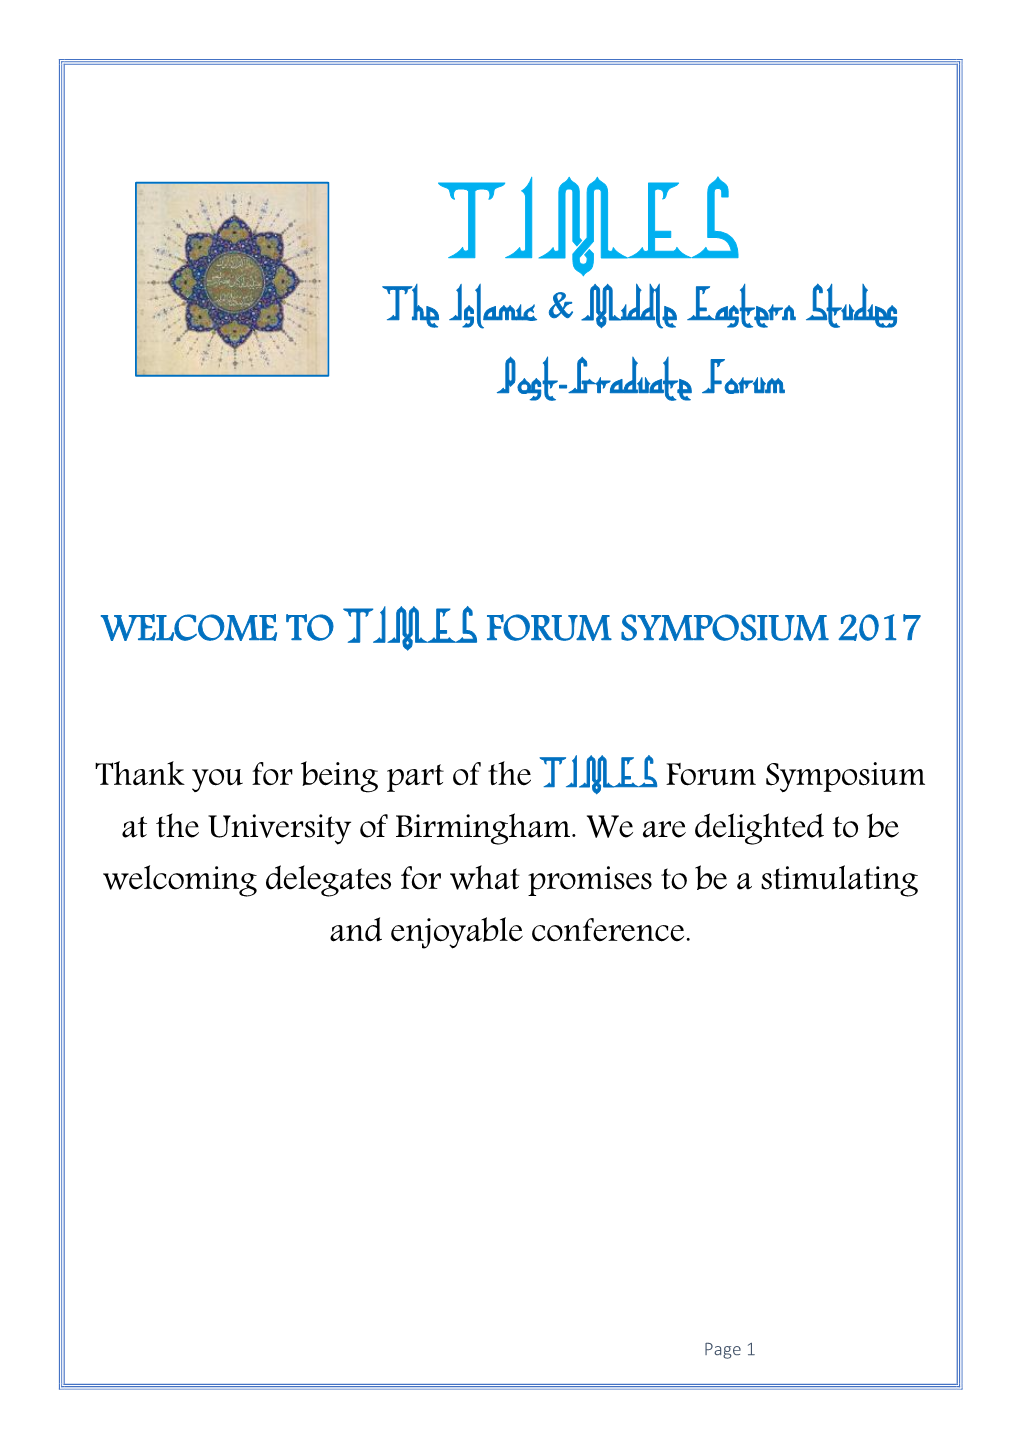 The Islamic & Middle Eastern Studies Post-Graduate Forum WELCOME